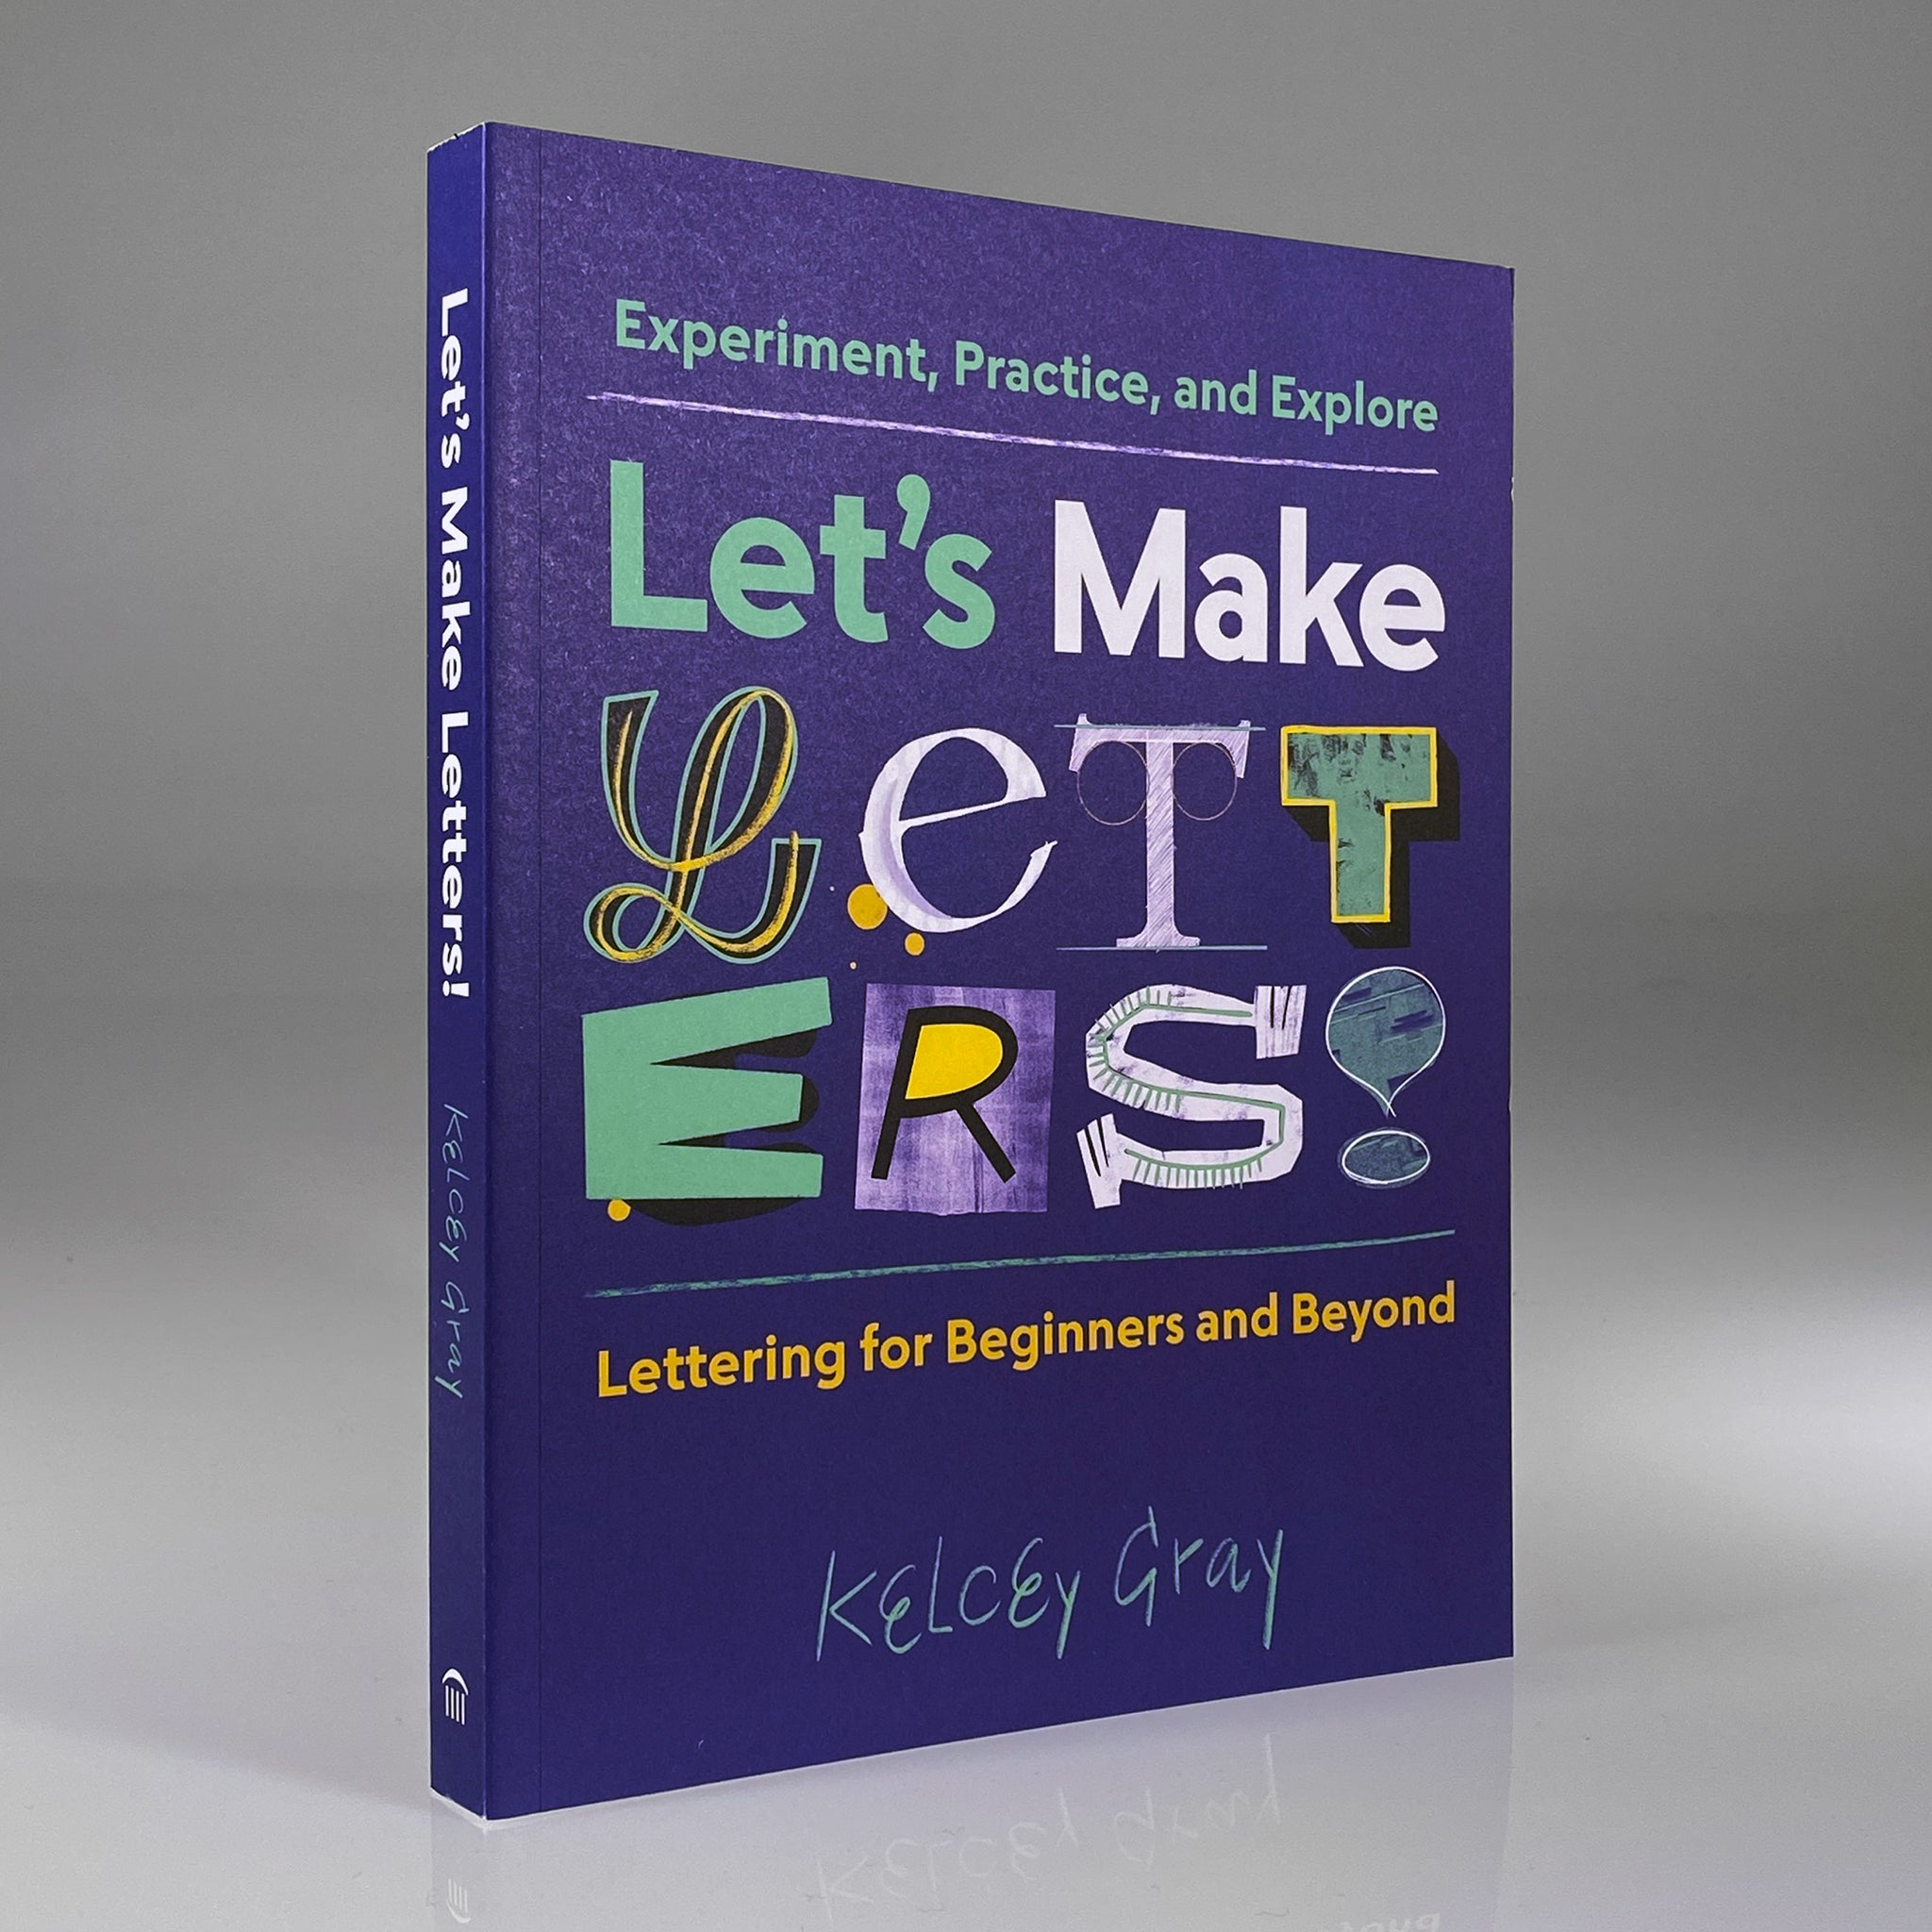 Let's Make Letters!: Experiment, Practice, and Explore